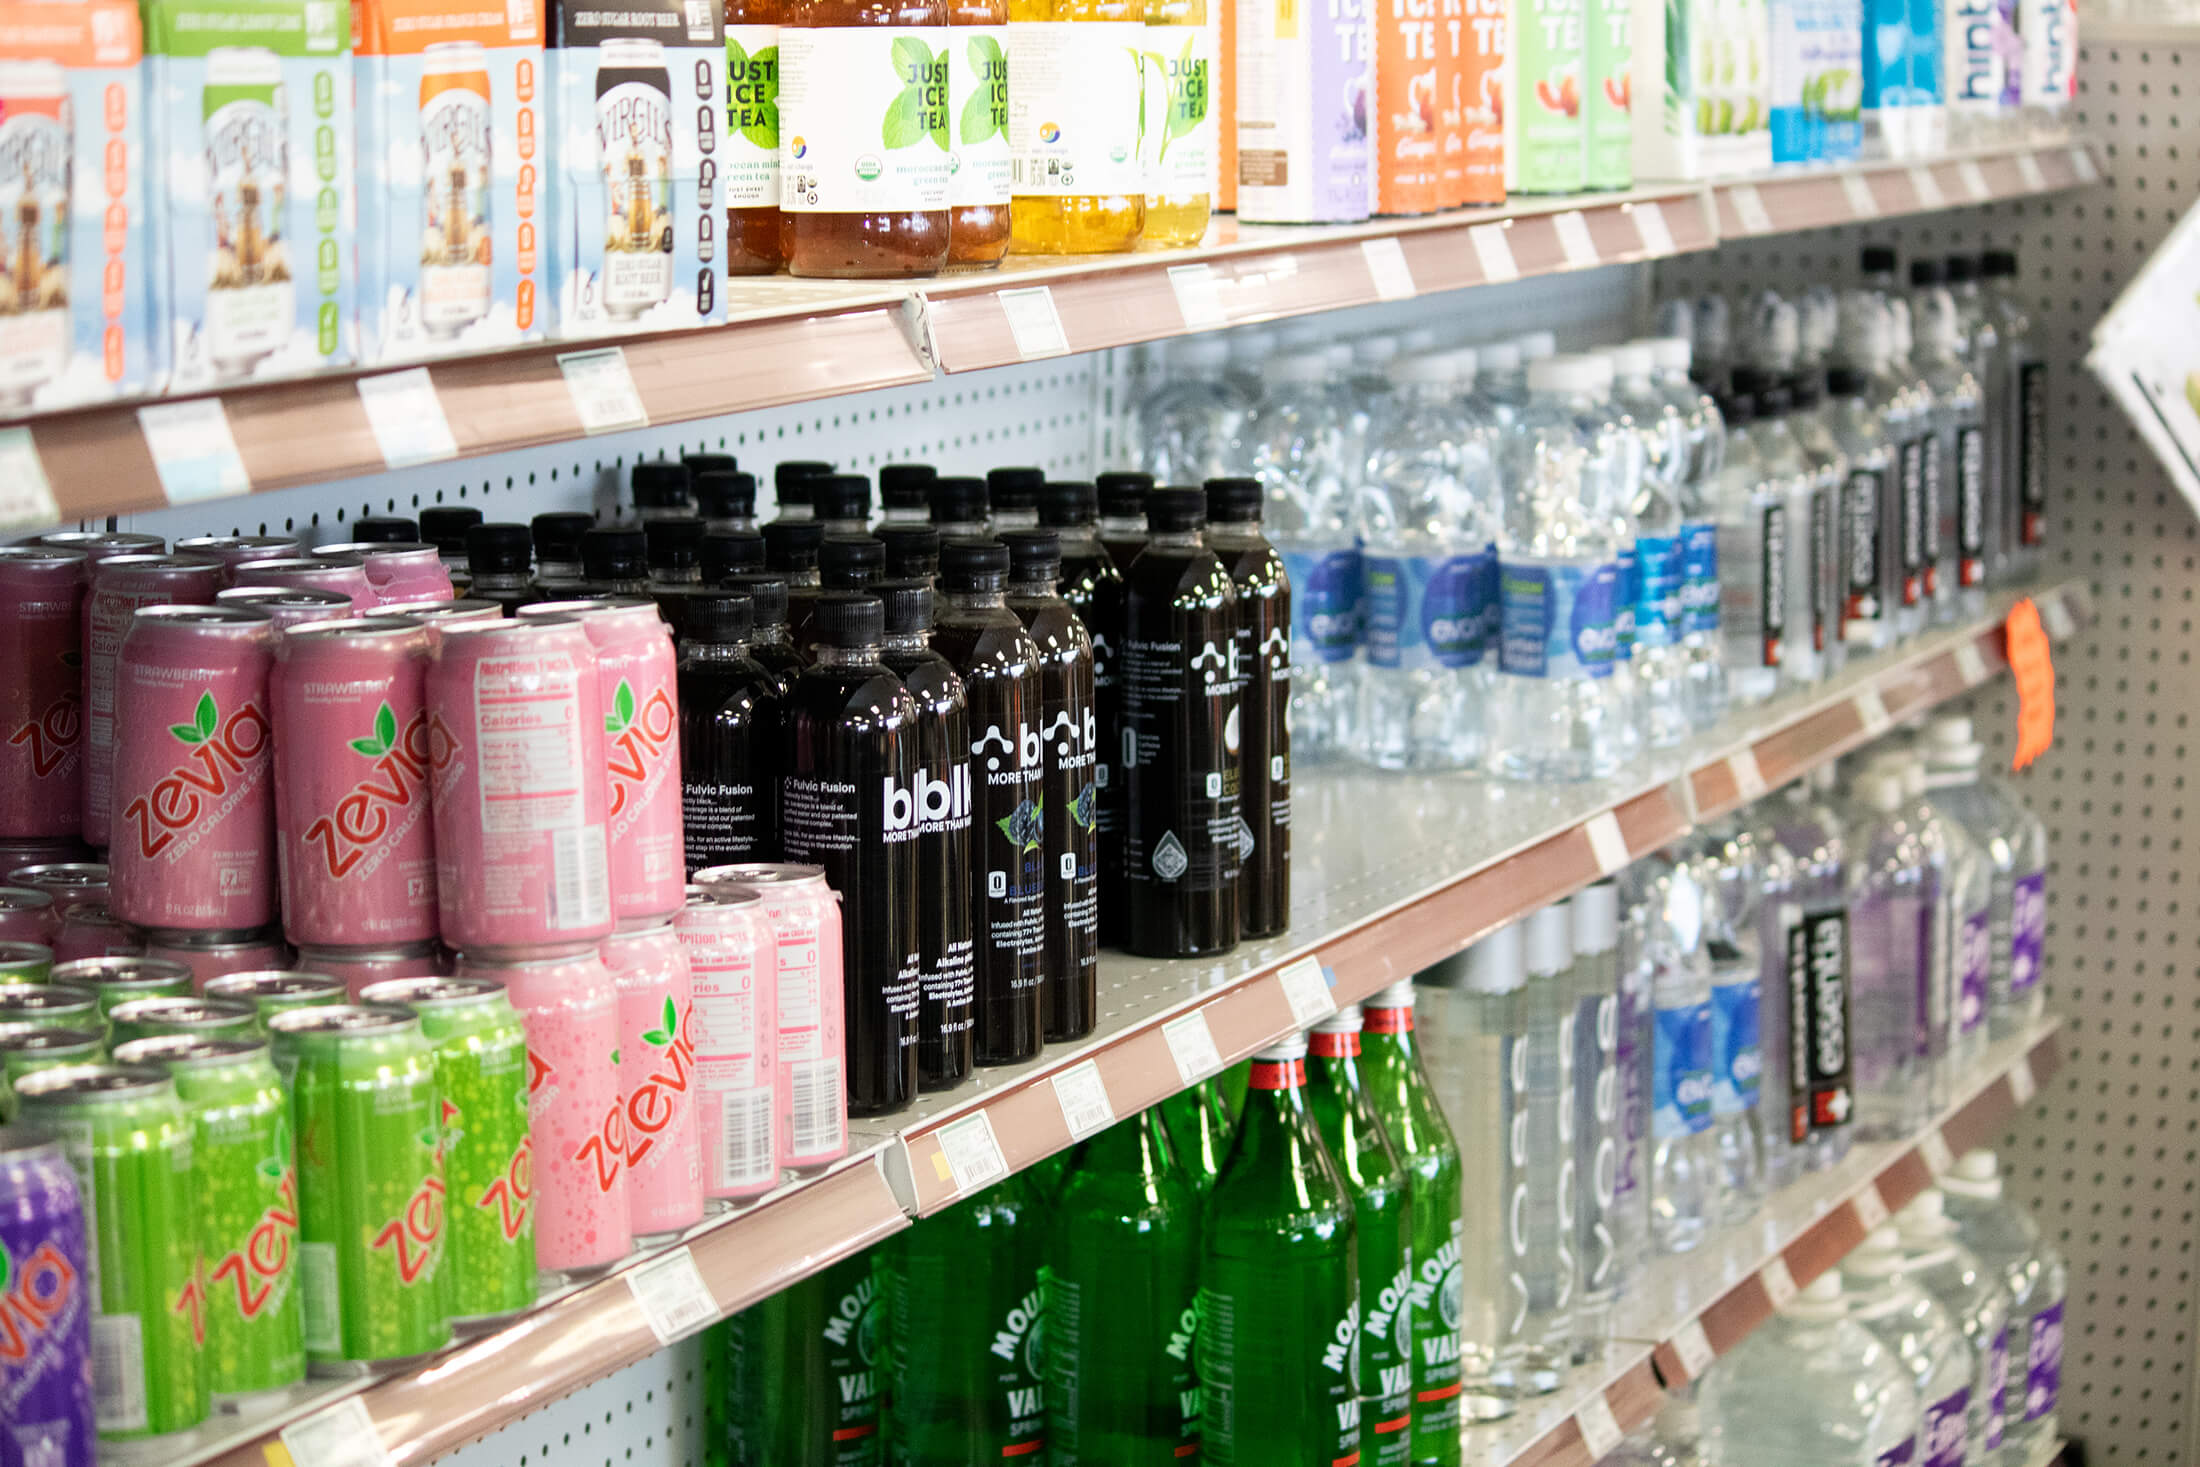  We carry all sorts of different beverages from tea to sparking waters to different sodas and juices in .